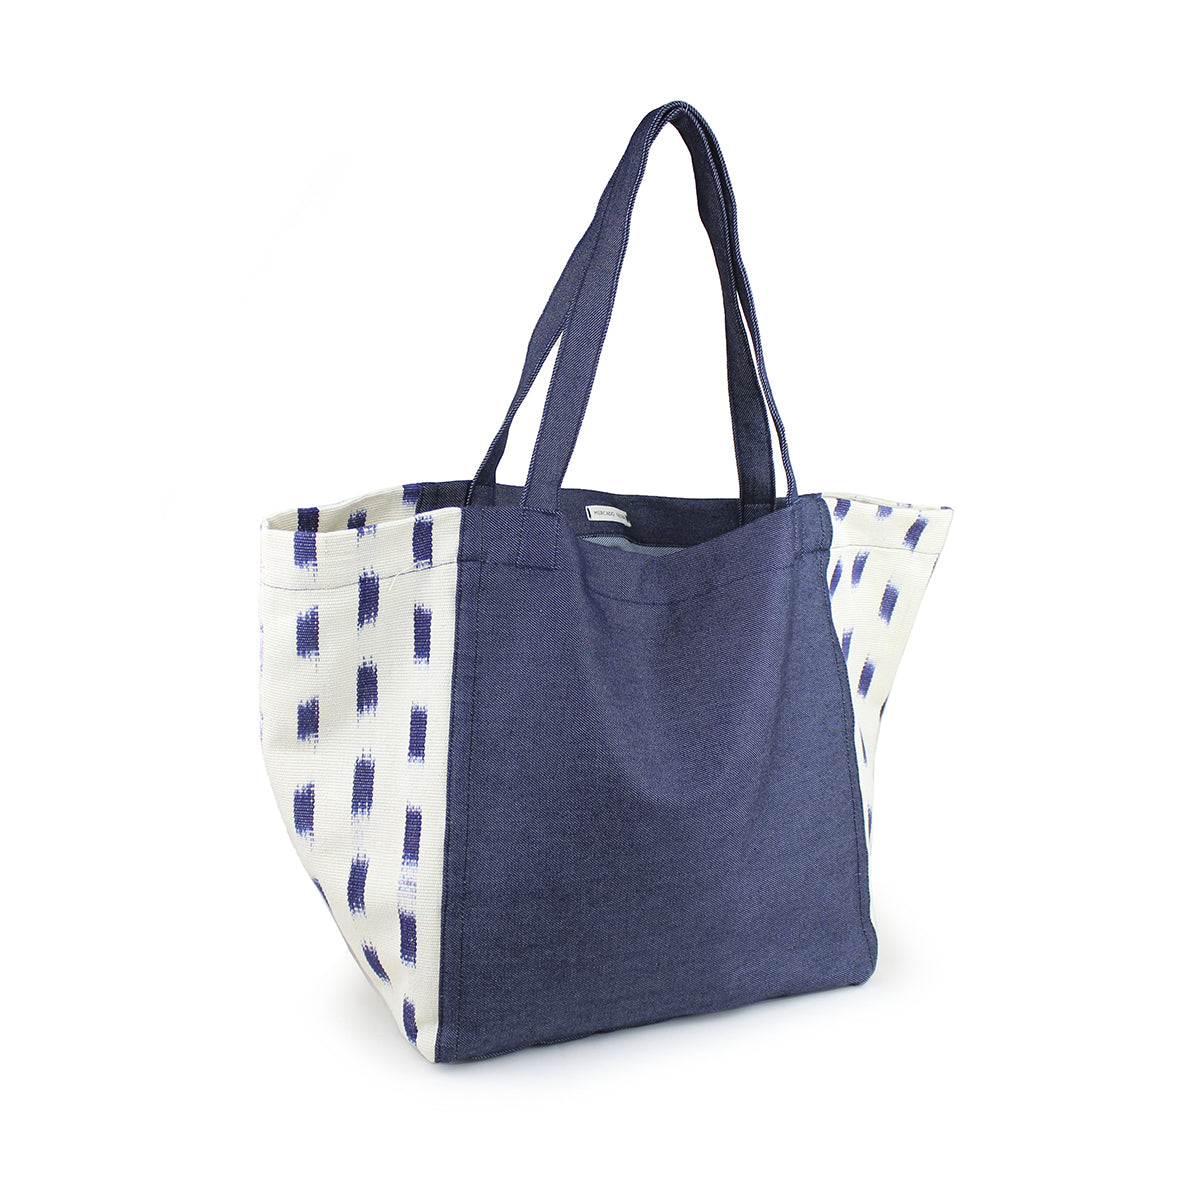 A top left view of the artisan hand woven Blanca Tote in Denim Jaspe. The tote has a dark denim wash. The sides have an abstract blue square pattern over a white background.